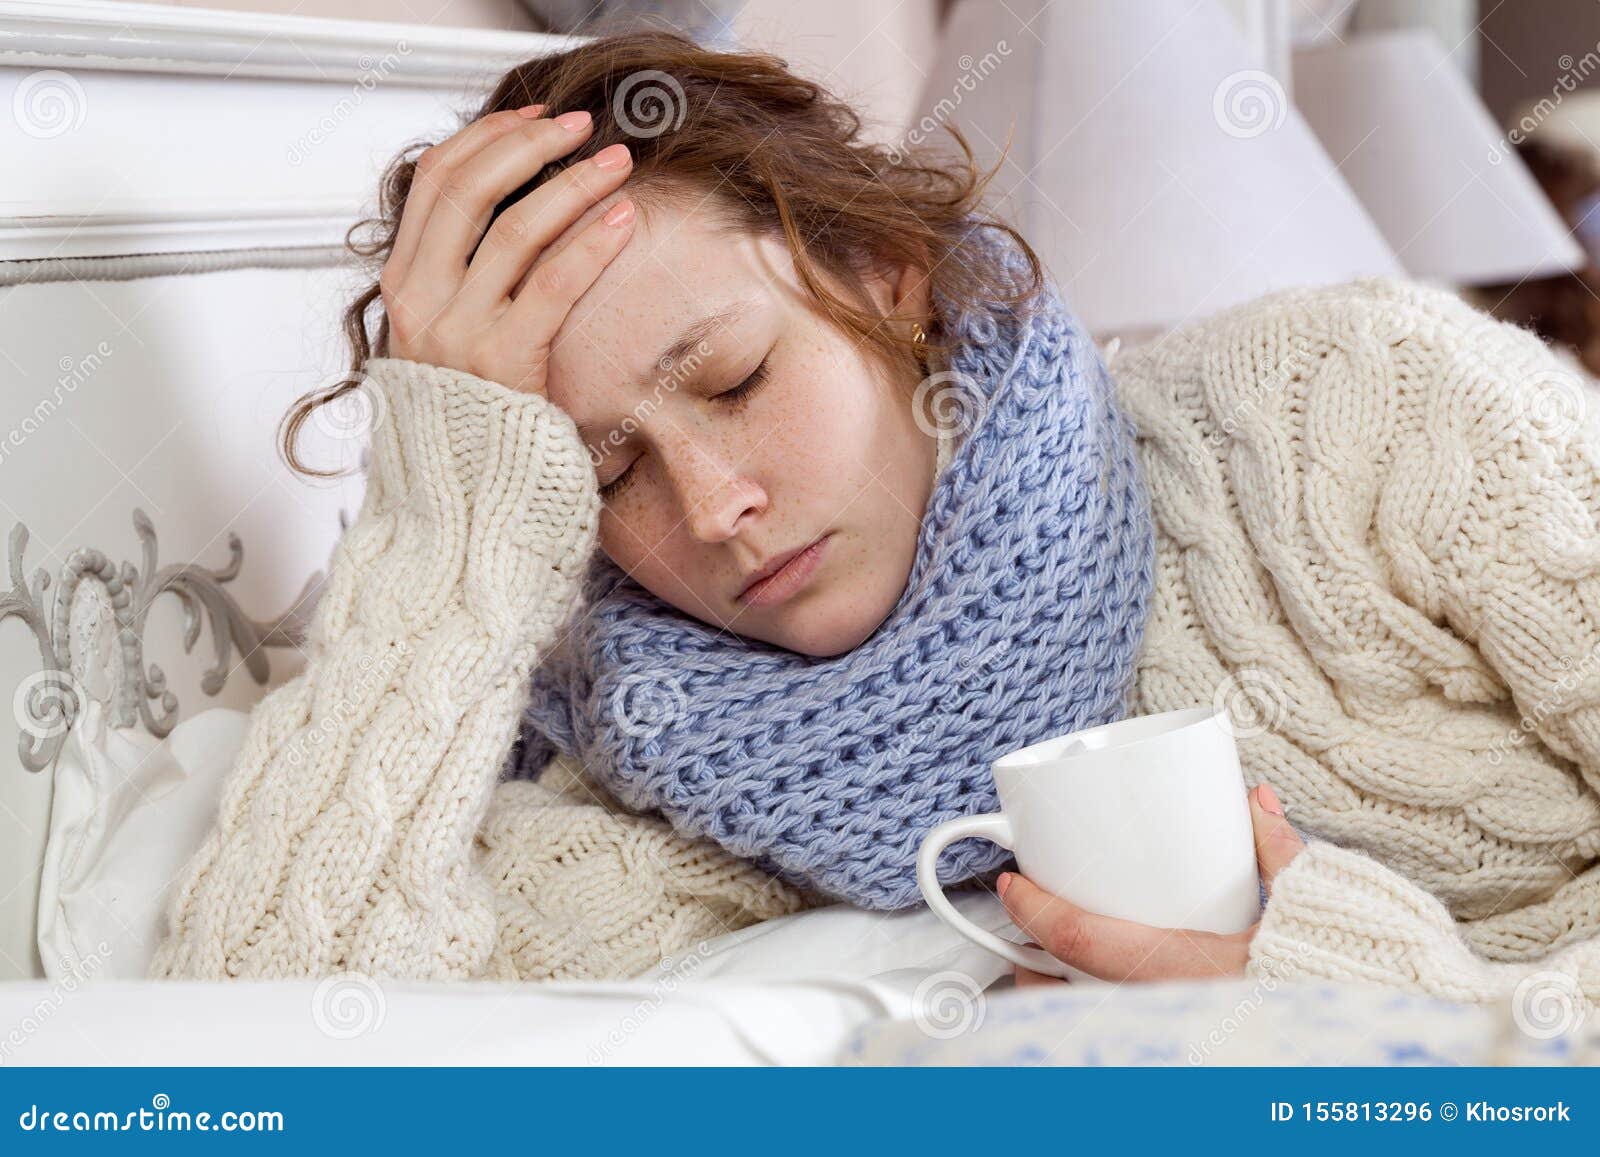 sad alone young woman in white sweater and blue scarf feeling headache, cold sick and resting home in bed. holding her painful